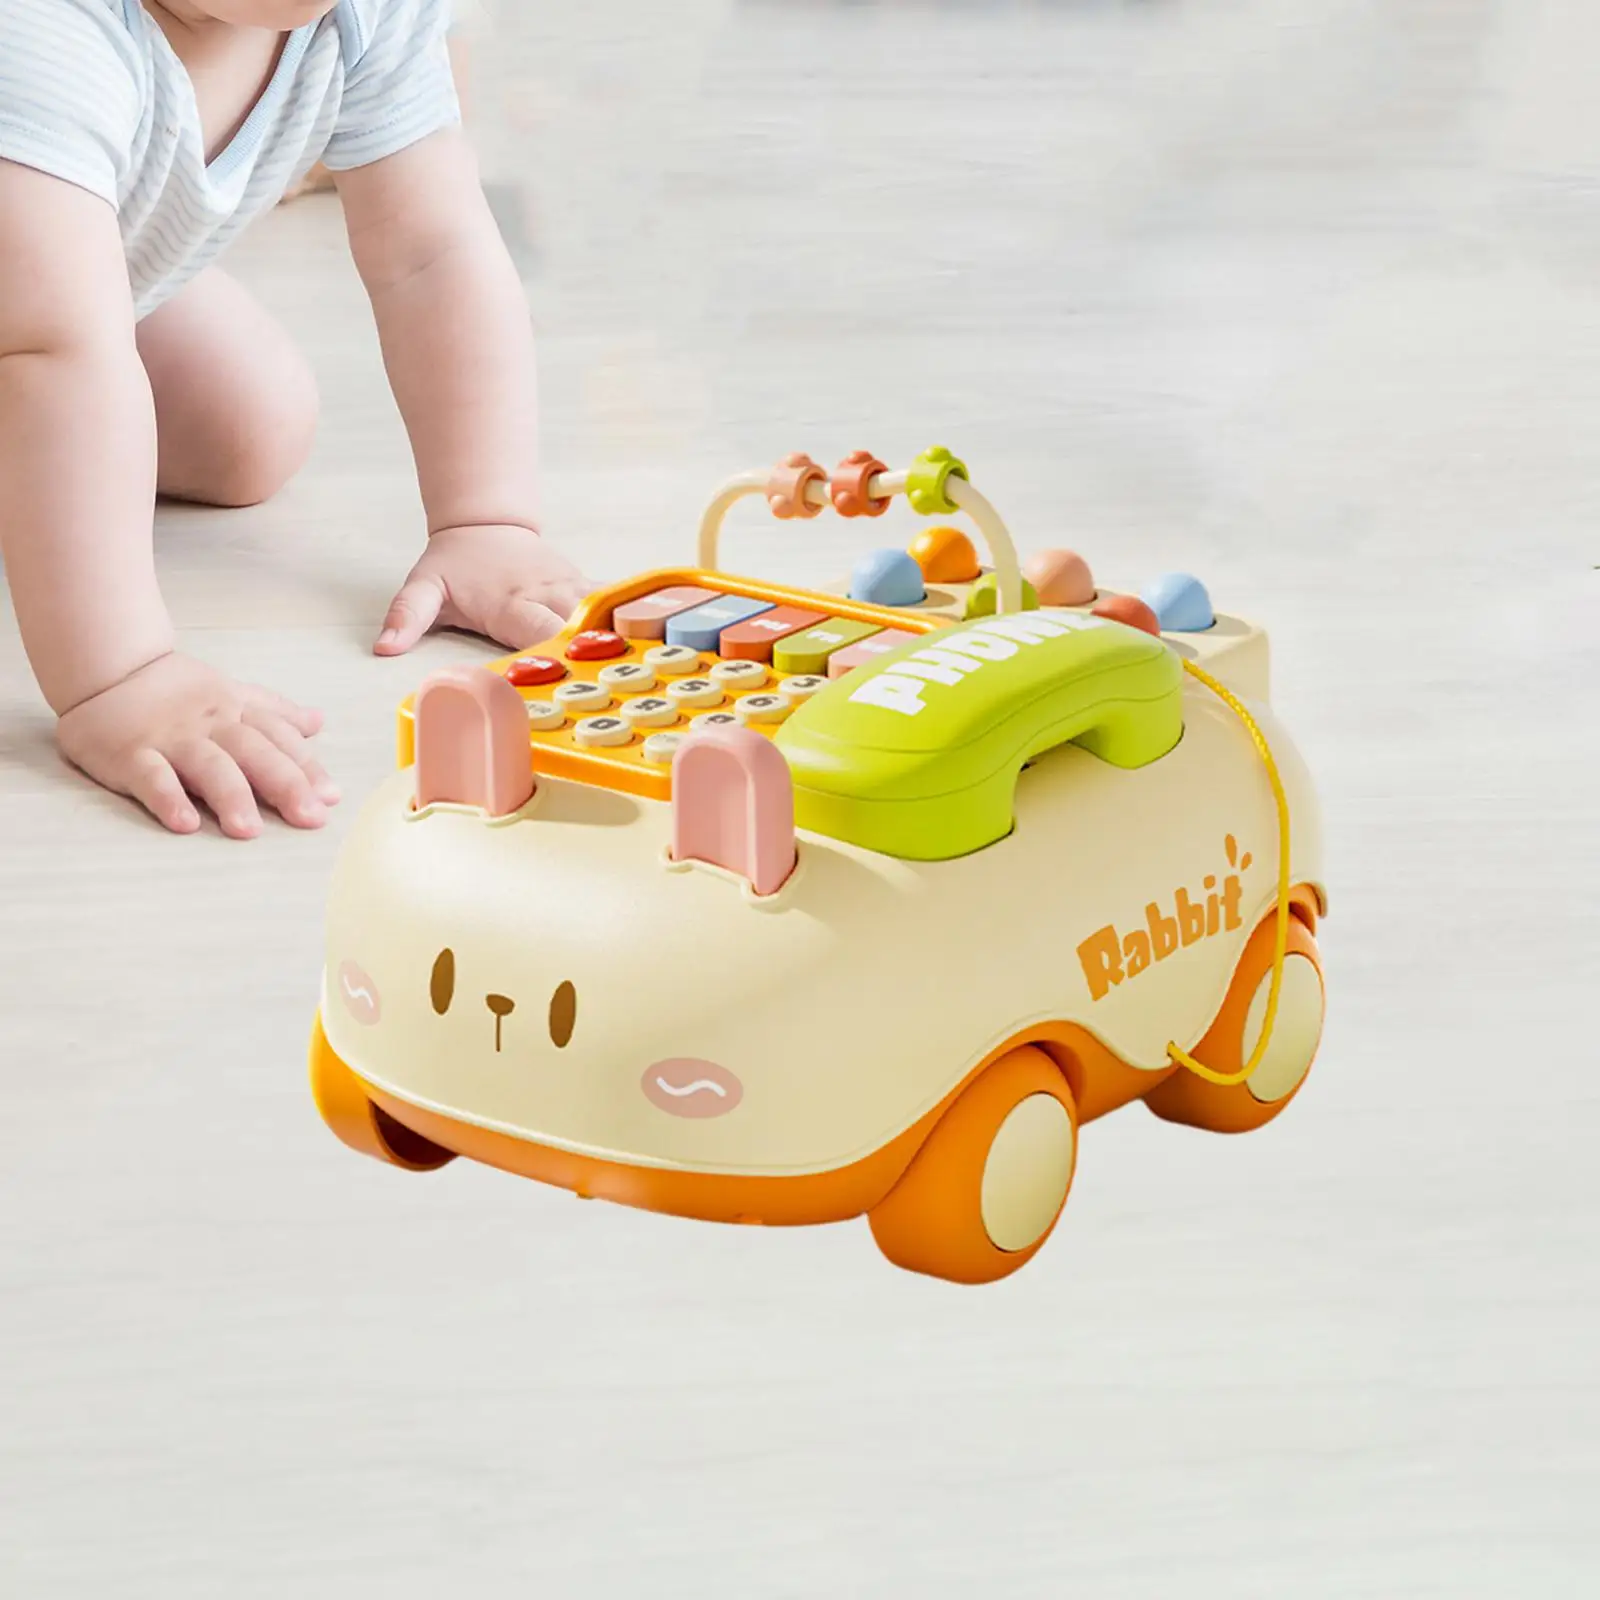 Baby Phone Toys Story Toy Mobile Phone Toy for Children Baby Interactive Toy